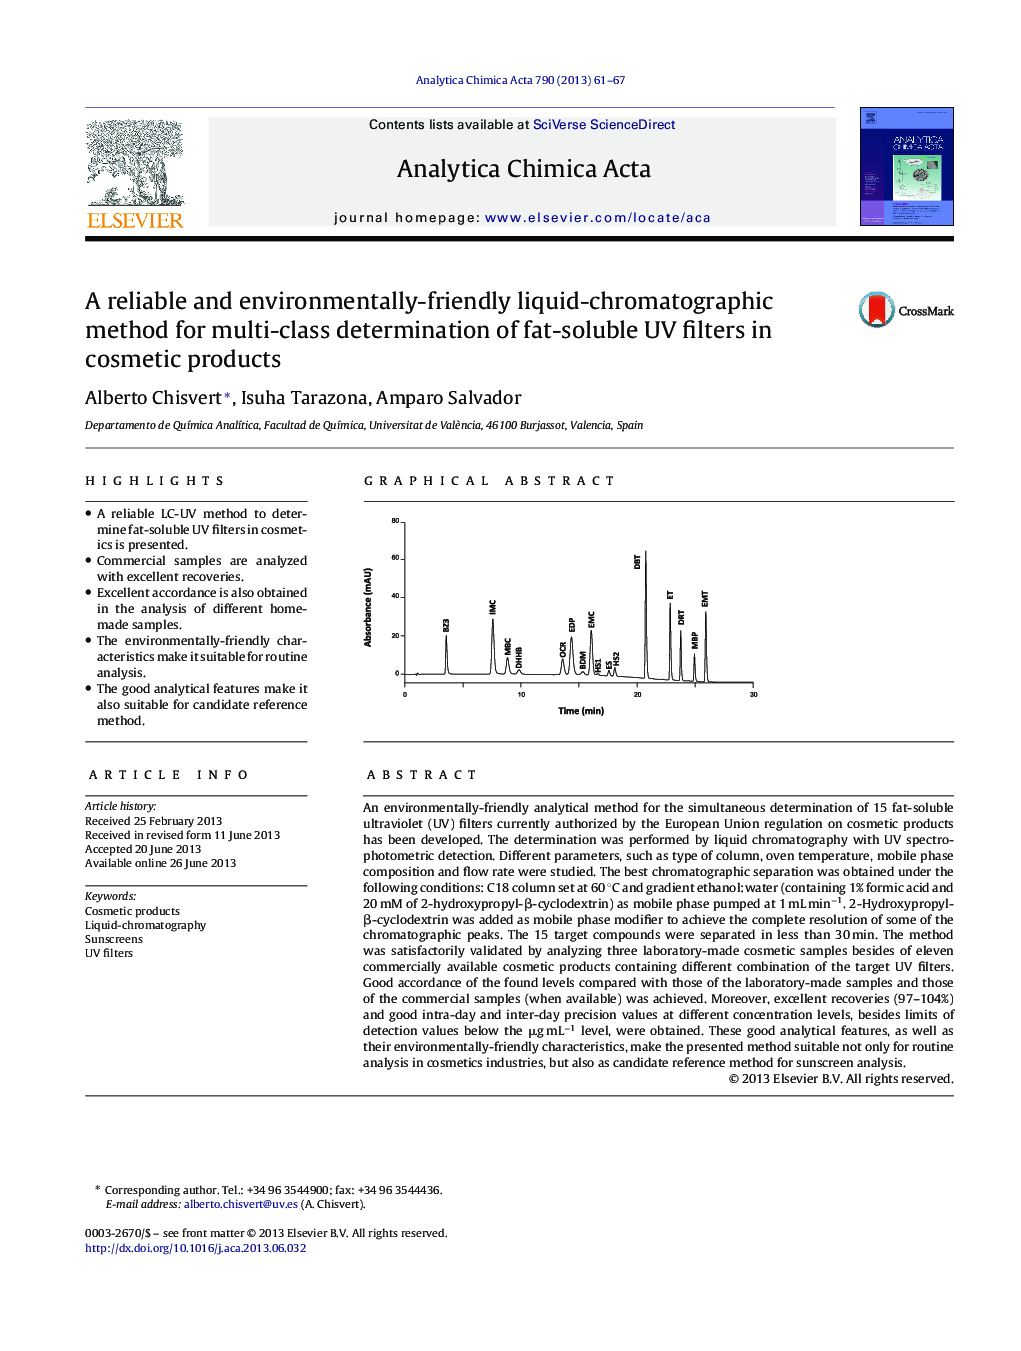 A reliable and environmentally-friendly liquid-chromatographic method for multi-class determination of fat-soluble UV filters in cosmetic products